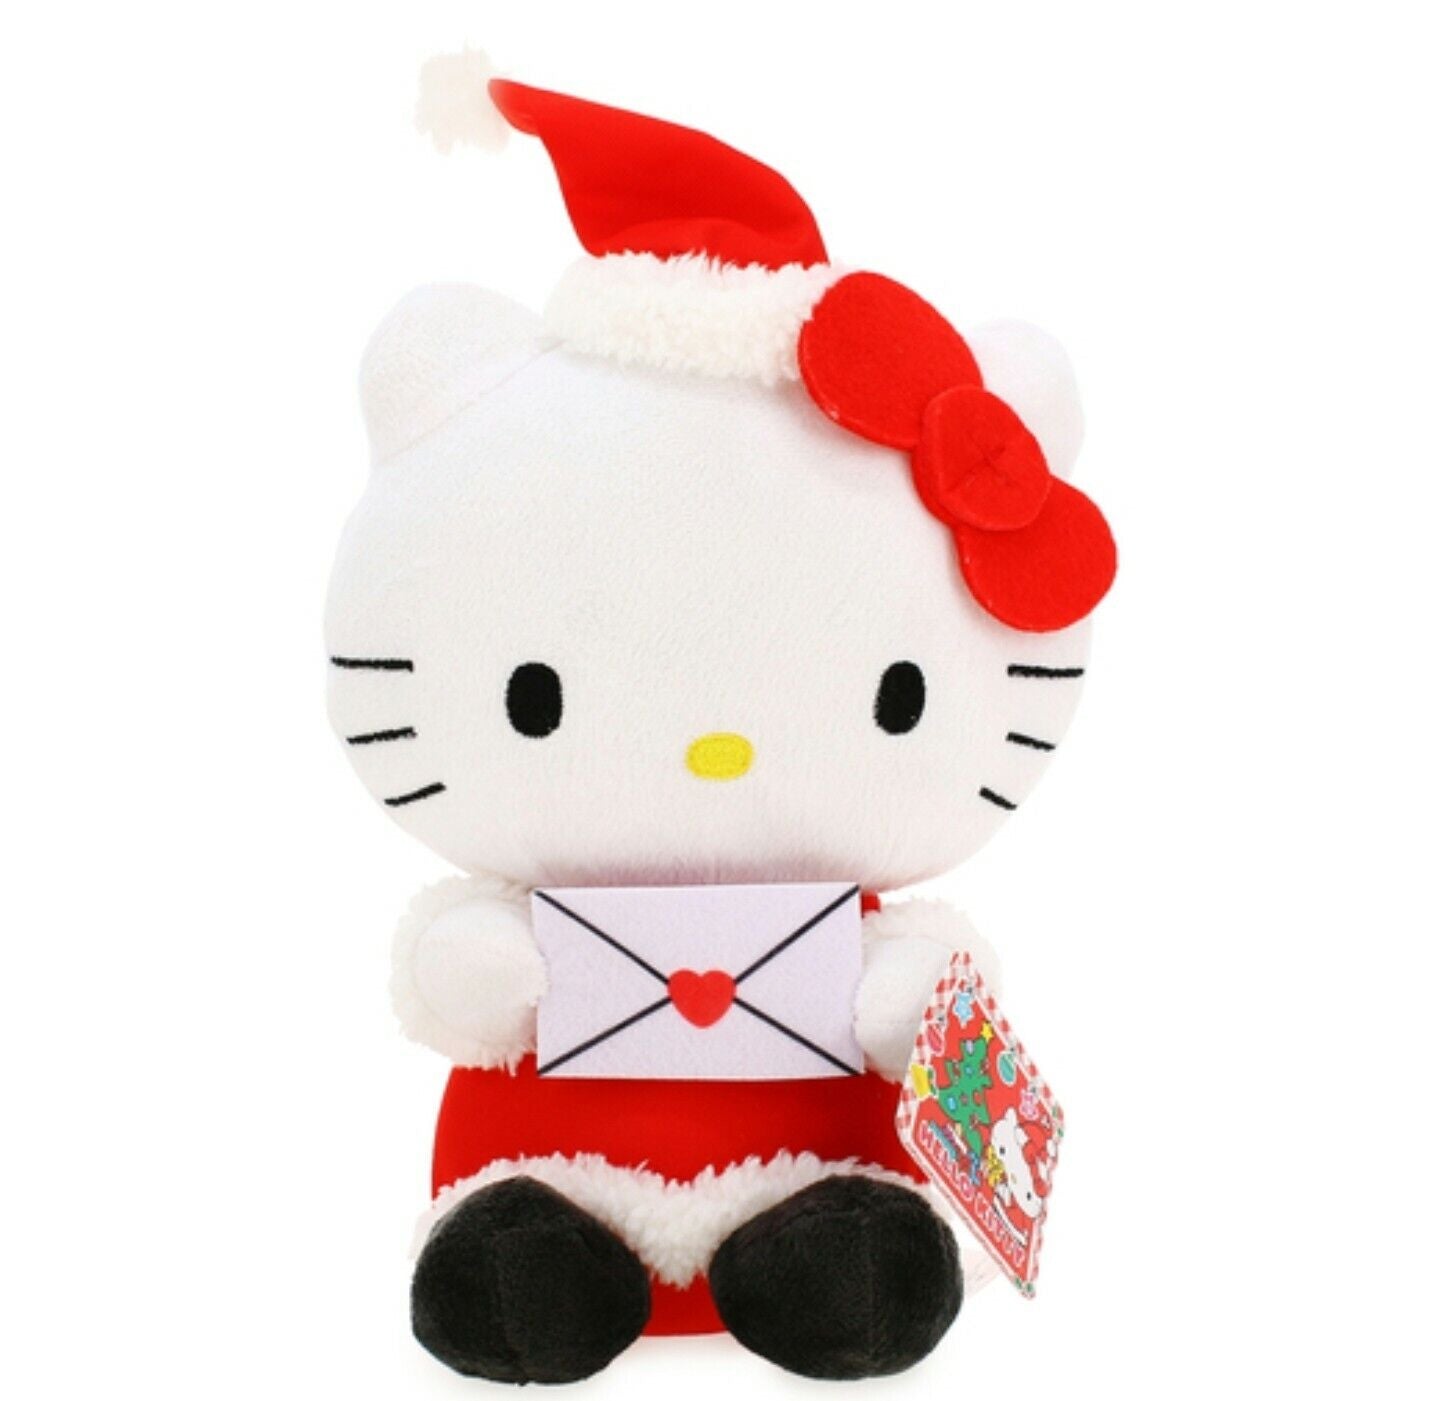 13" Christmas Hello Kitty with a Heart Note